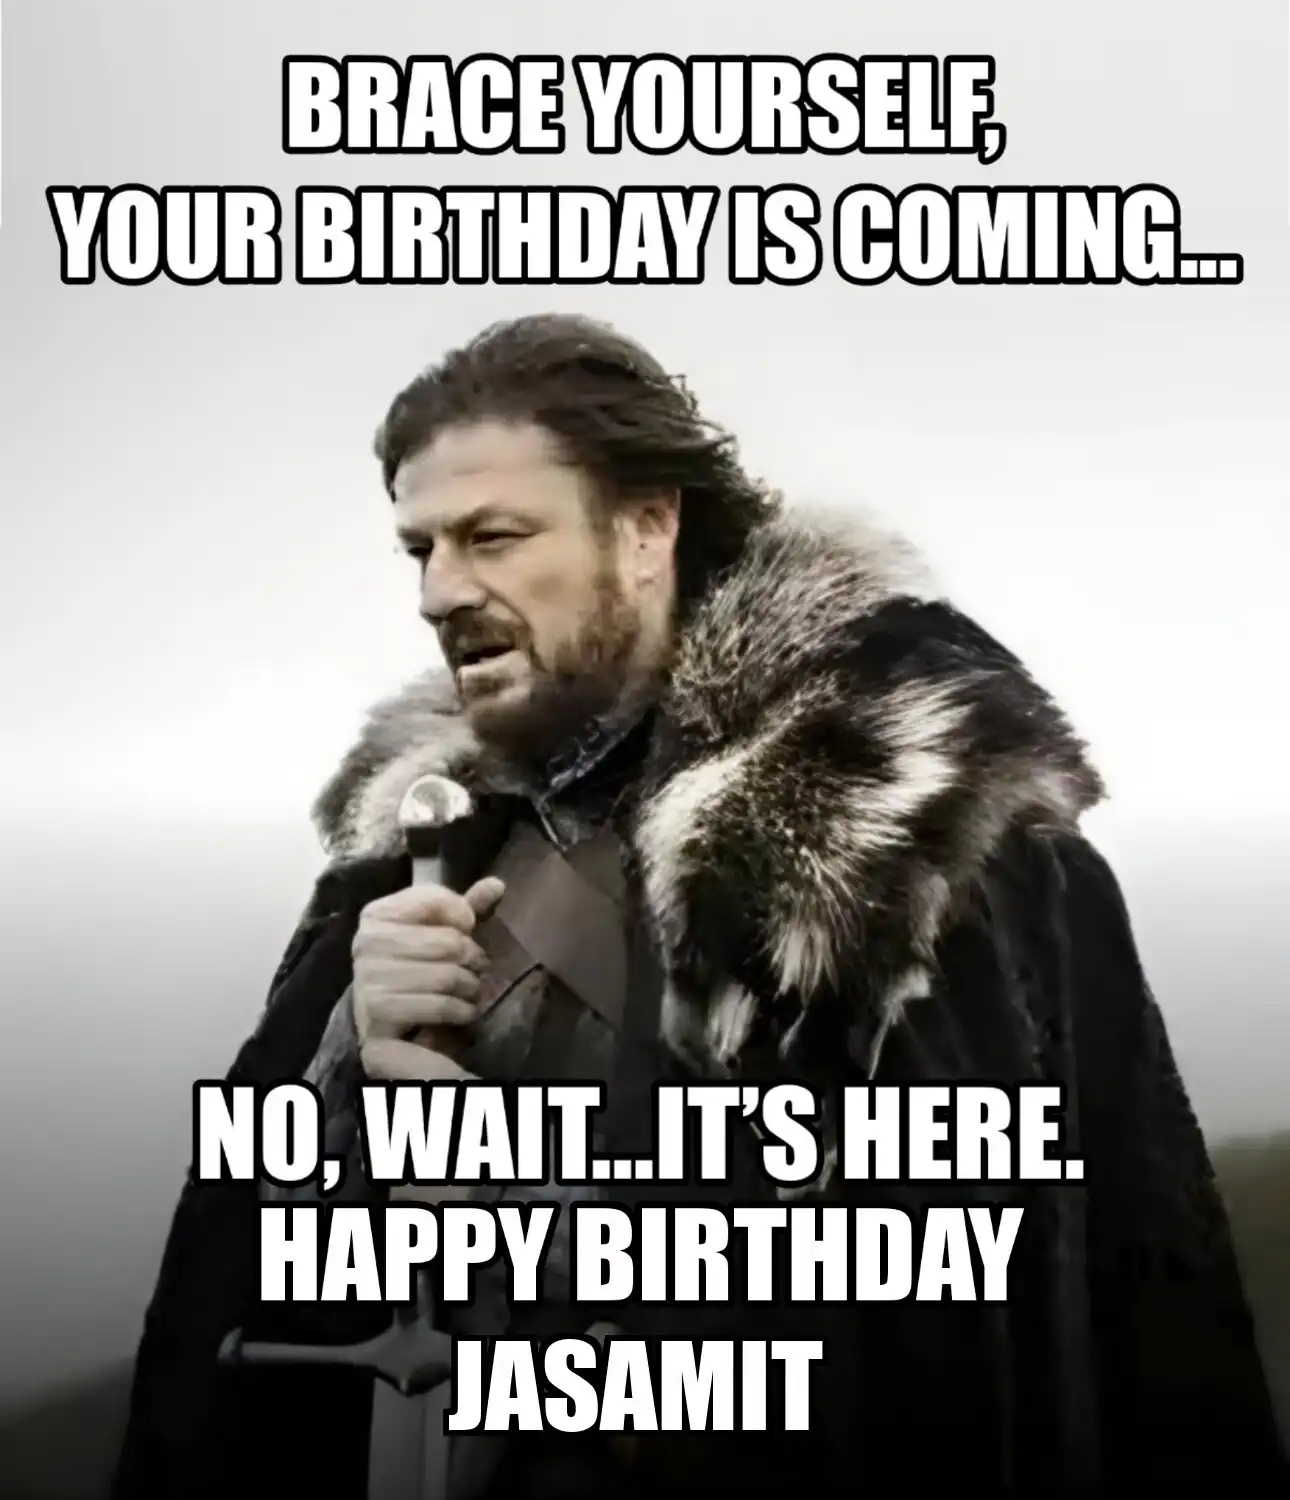 Happy Birthday Jasamit Brace Yourself Your Birthday Is Coming Meme